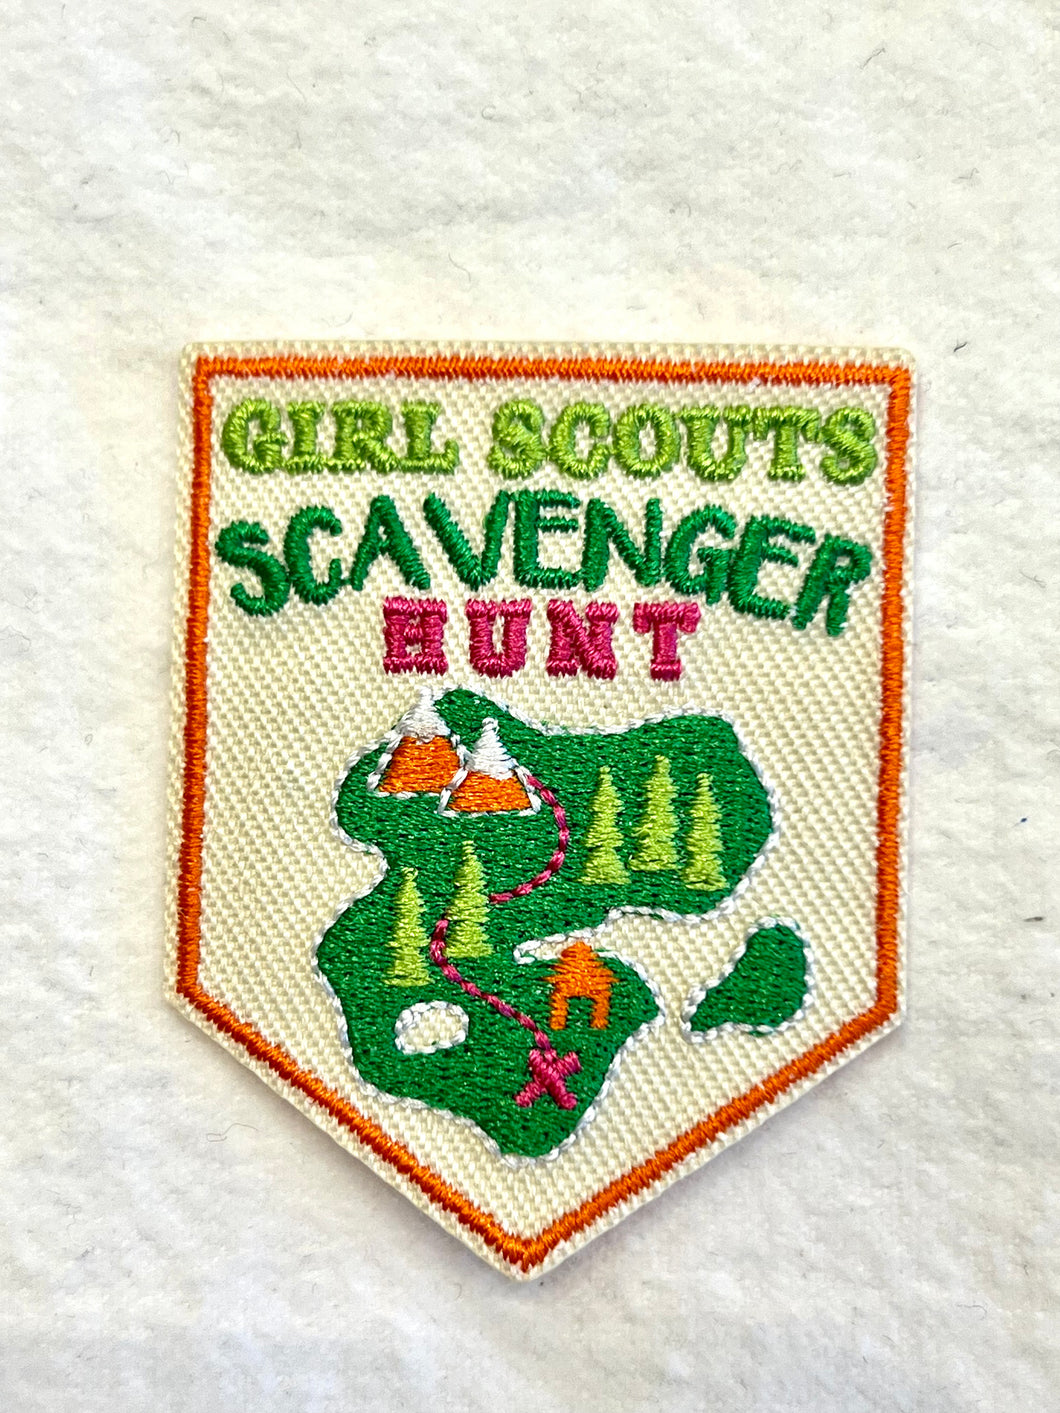 Girl Scouts scavenger hunt patch